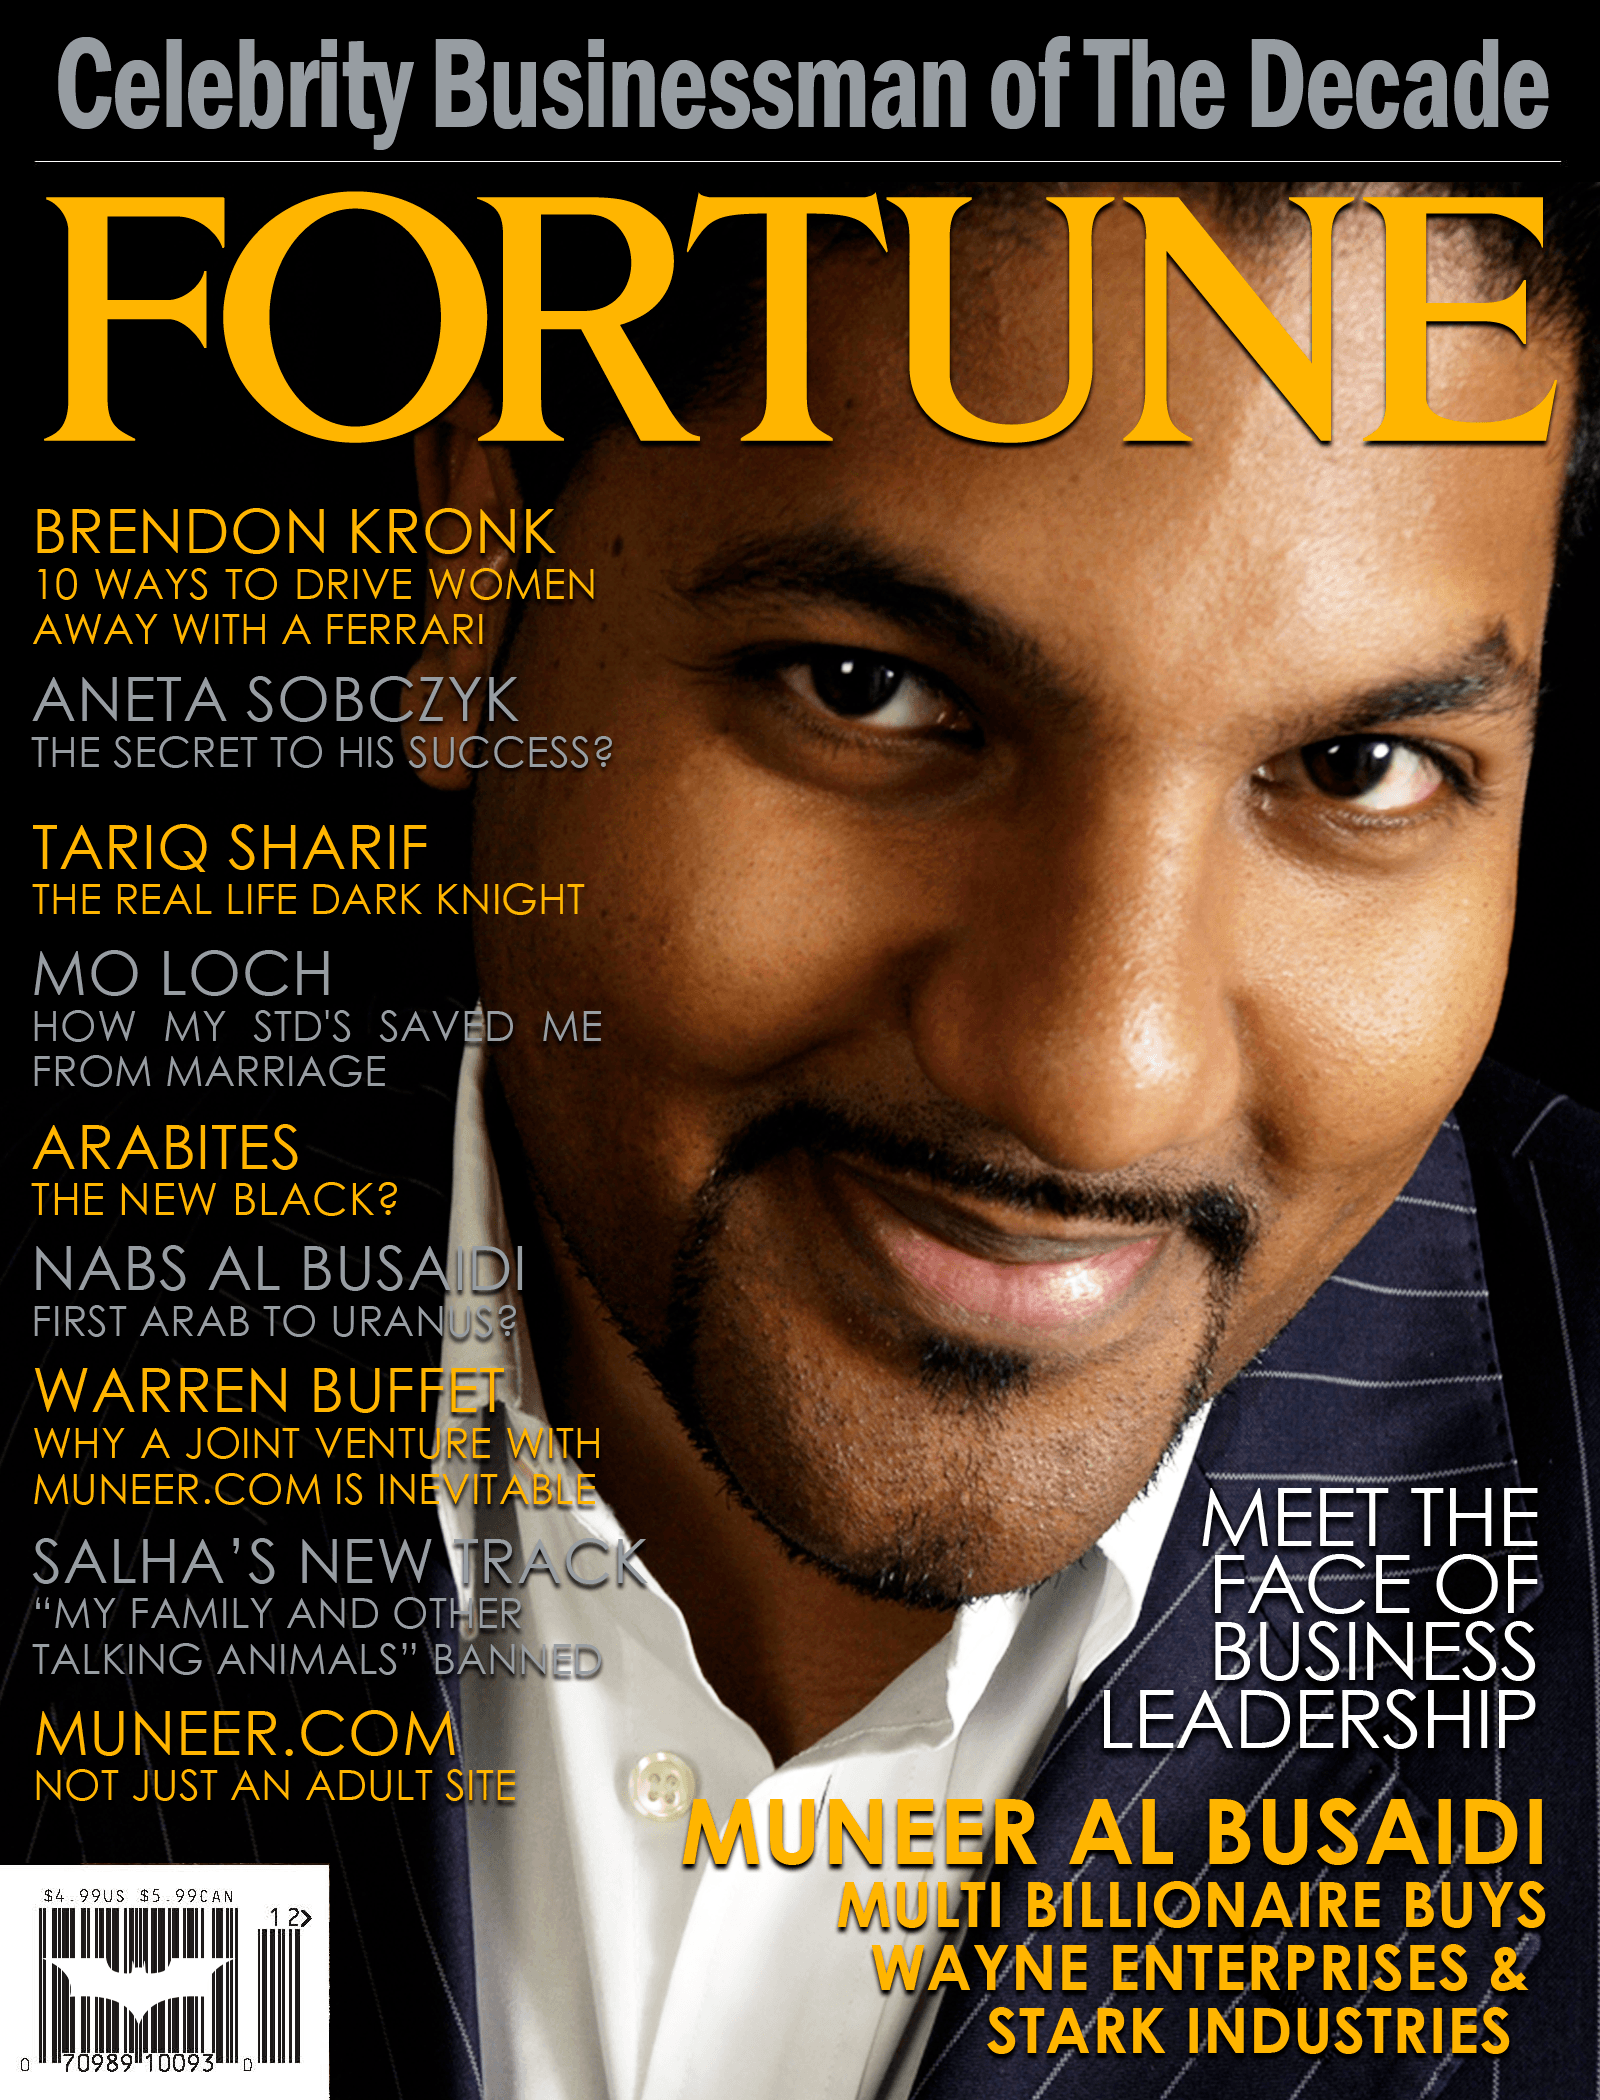 Muneer on the cover of Fortune mag spoof